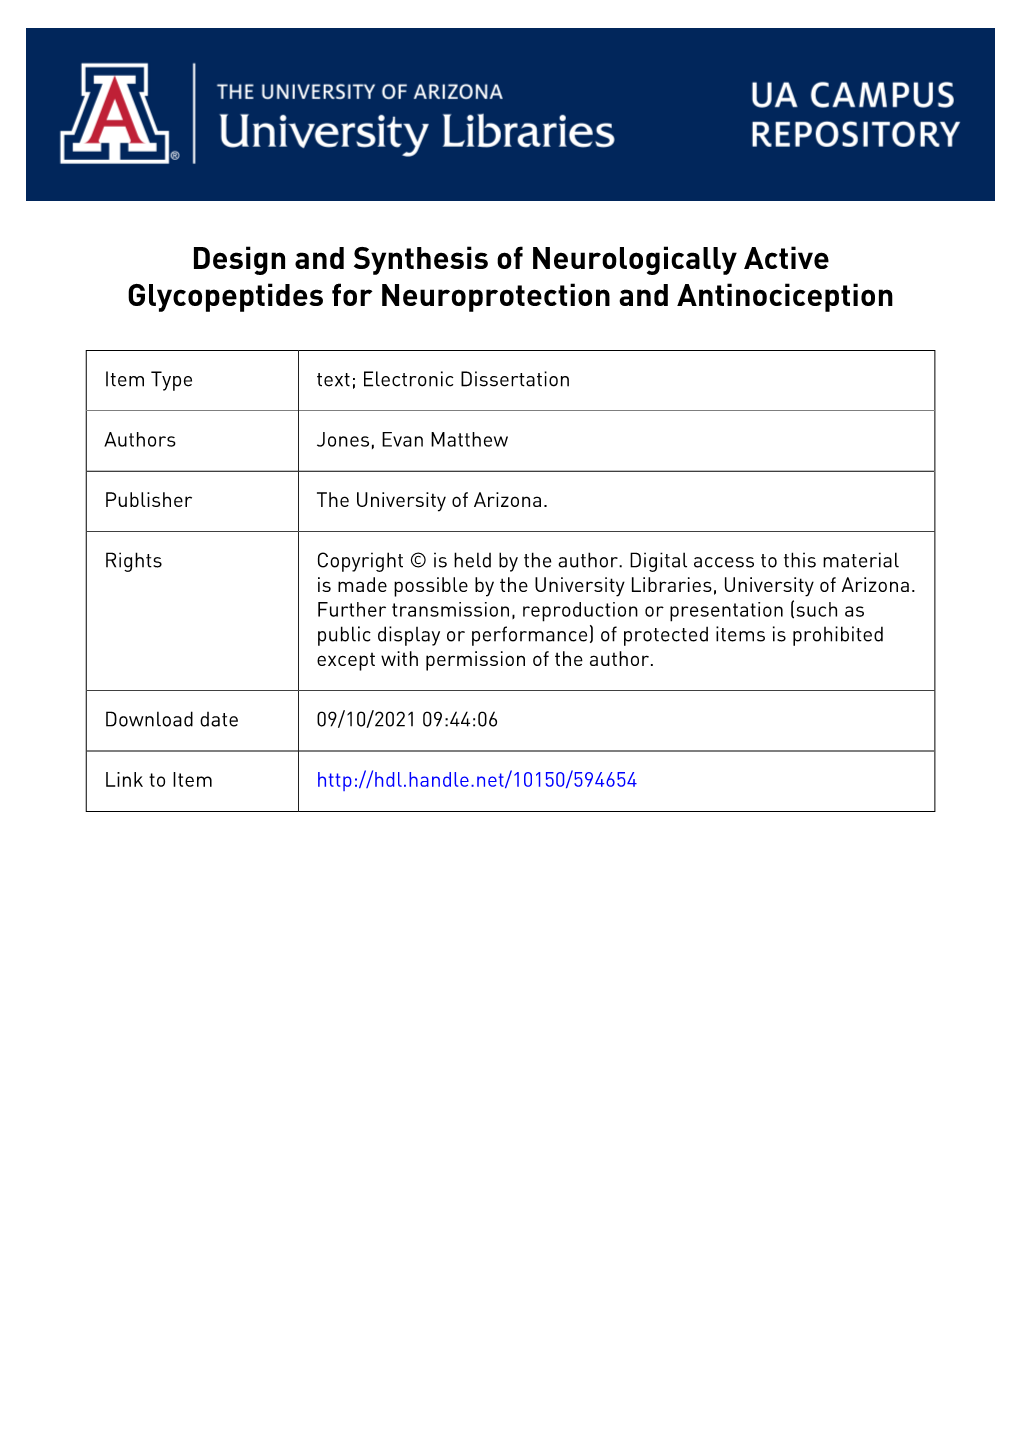 1 Design and Synthesis of Neurologically Active